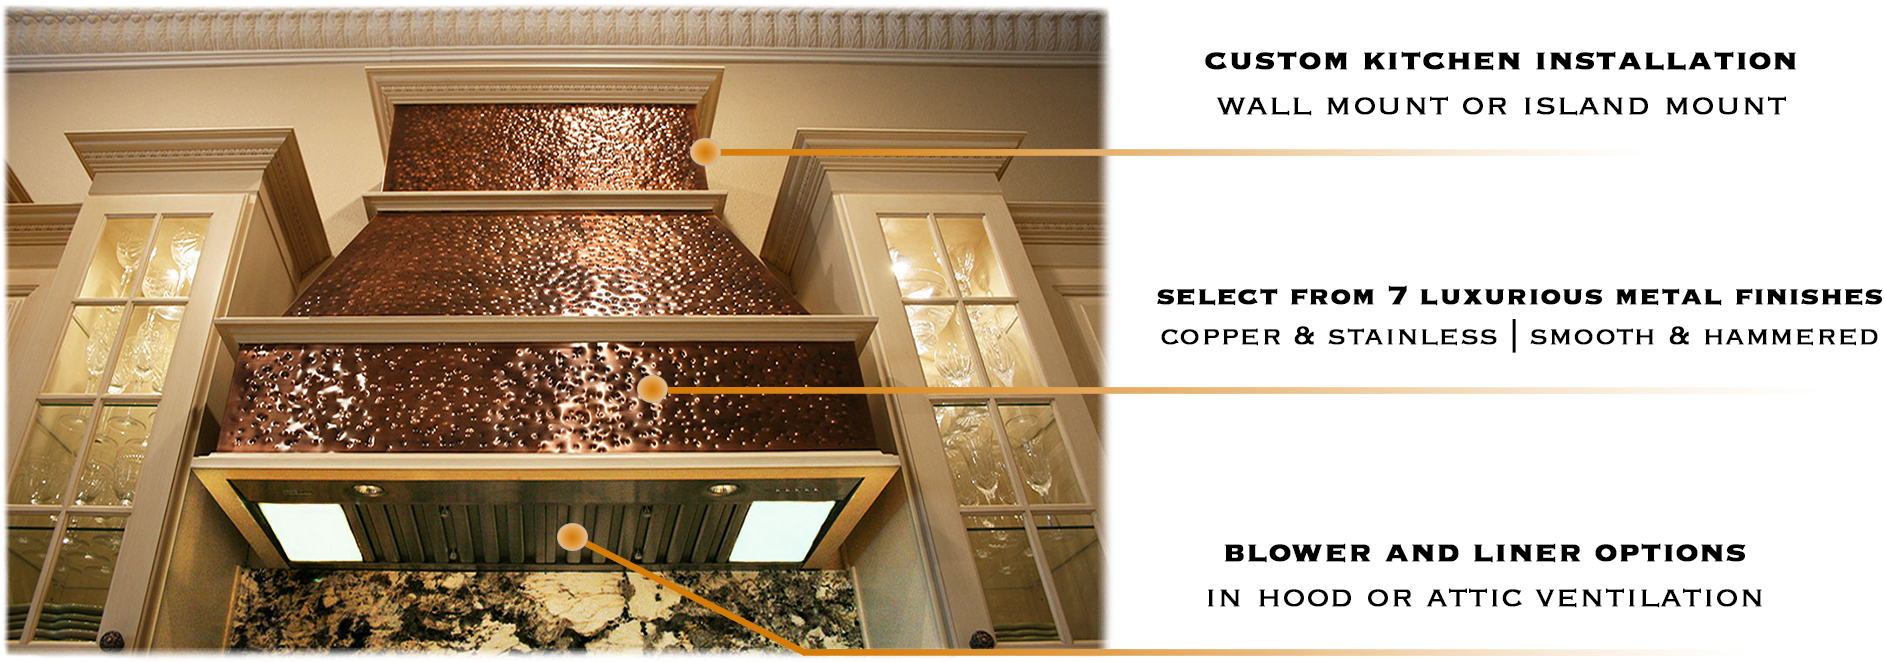 Orlando kitchen hood - Copper and Stainless Steel